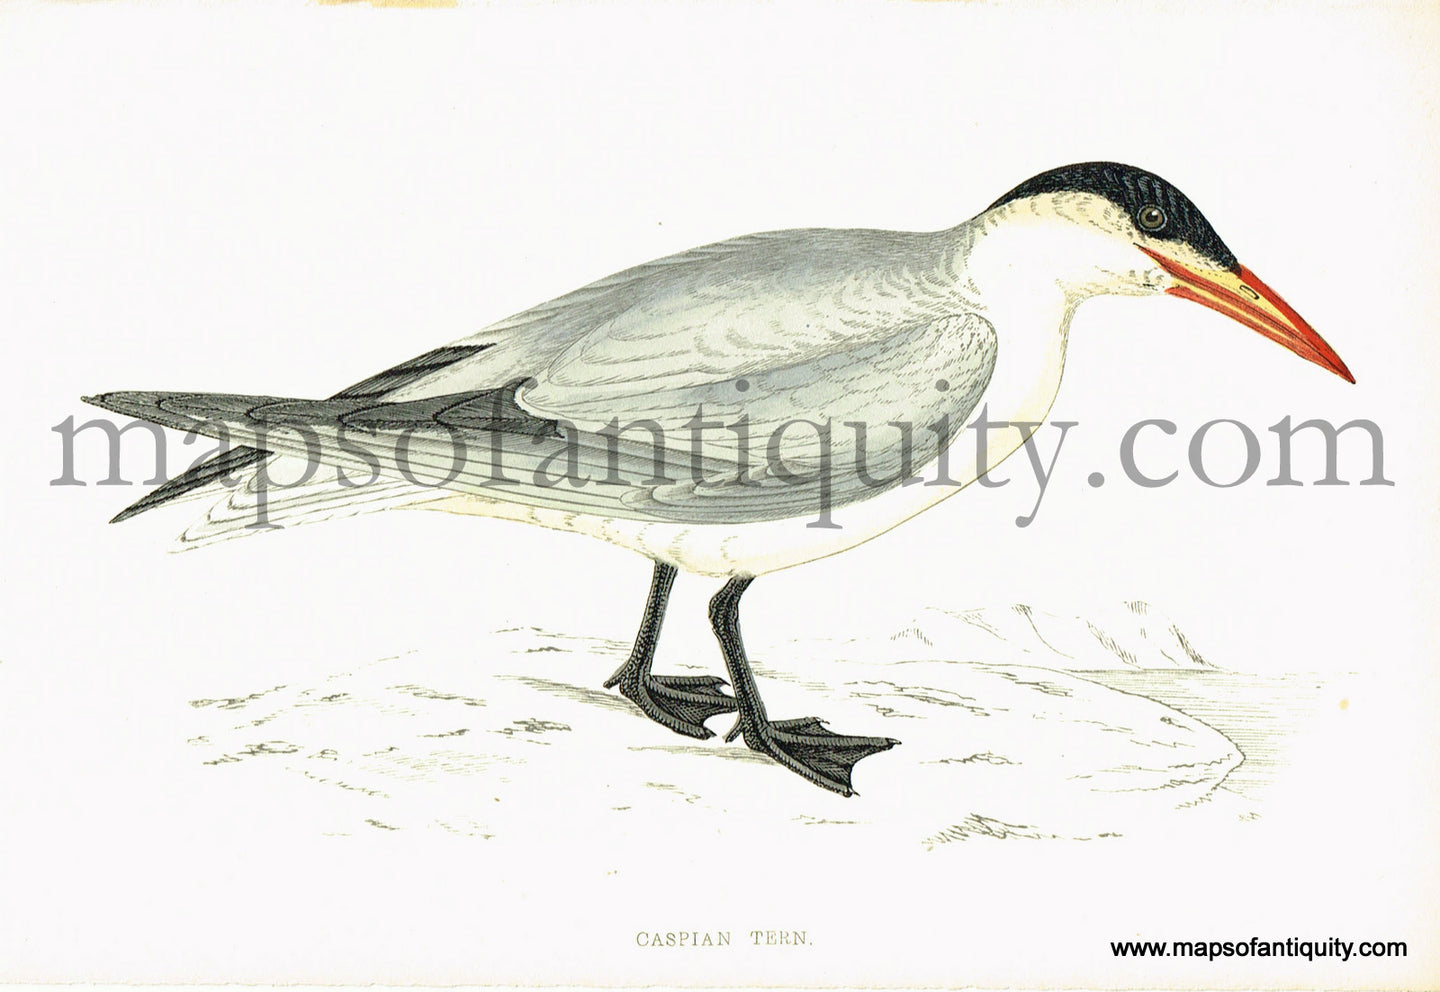 Antique-Hand-Colored-Engraved-Illustration-Caspian-Tern-Antique-Prints-Natural-History-Birds-1867-Morris-Maps-Of-Antiquity